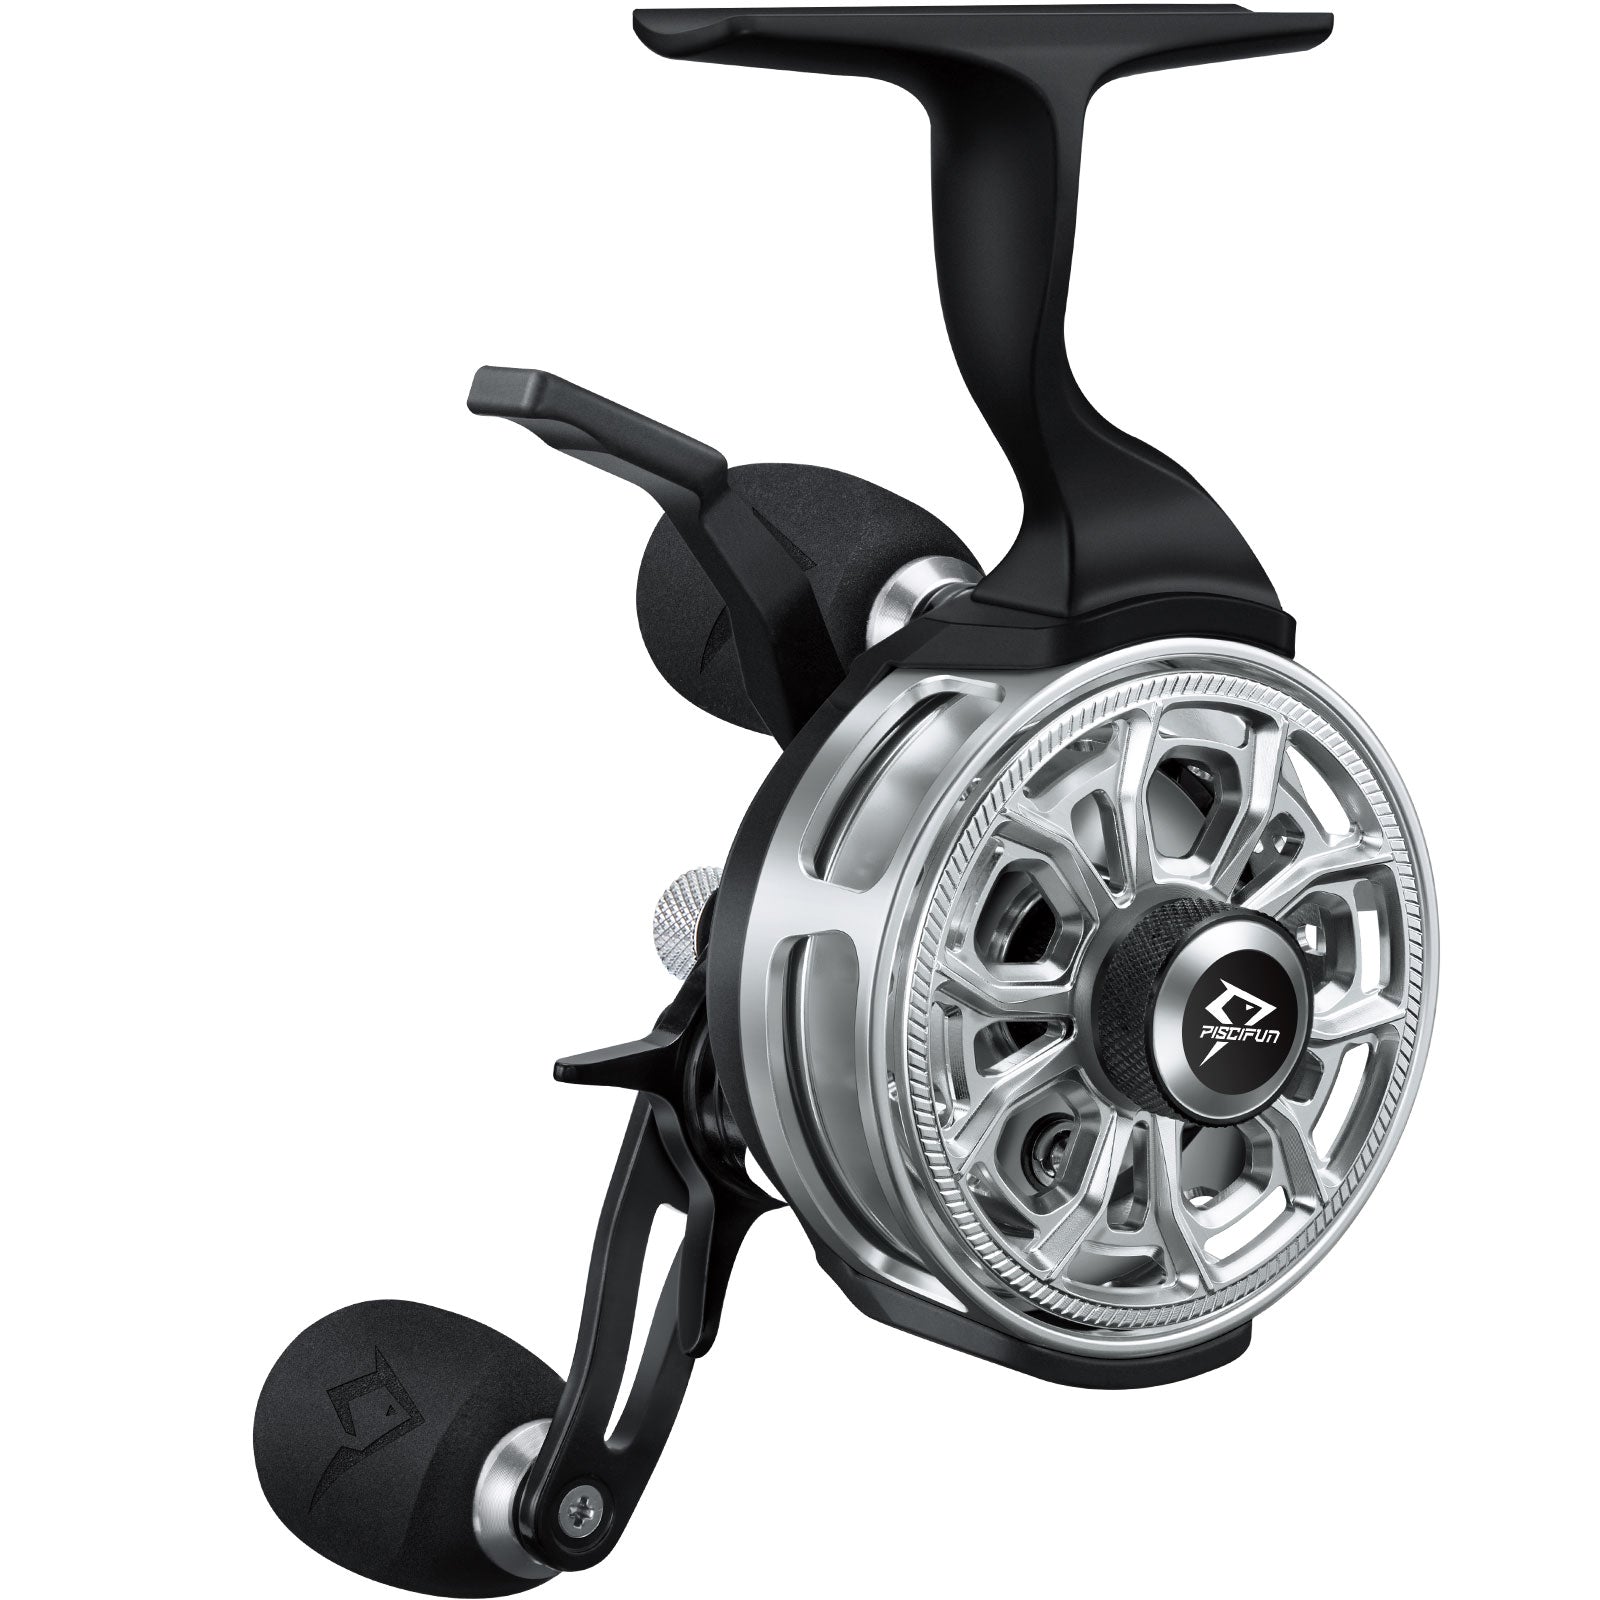  ICX Frost Ice Fishing Reel, Inline Ice Reel, Innovative  Structure Design, Magnetic Drop System, No Line Twist, Large Spool  Diameter, 7+1ShieldedBB, 27:1 High Speed Ratio-Right Hand, Blue